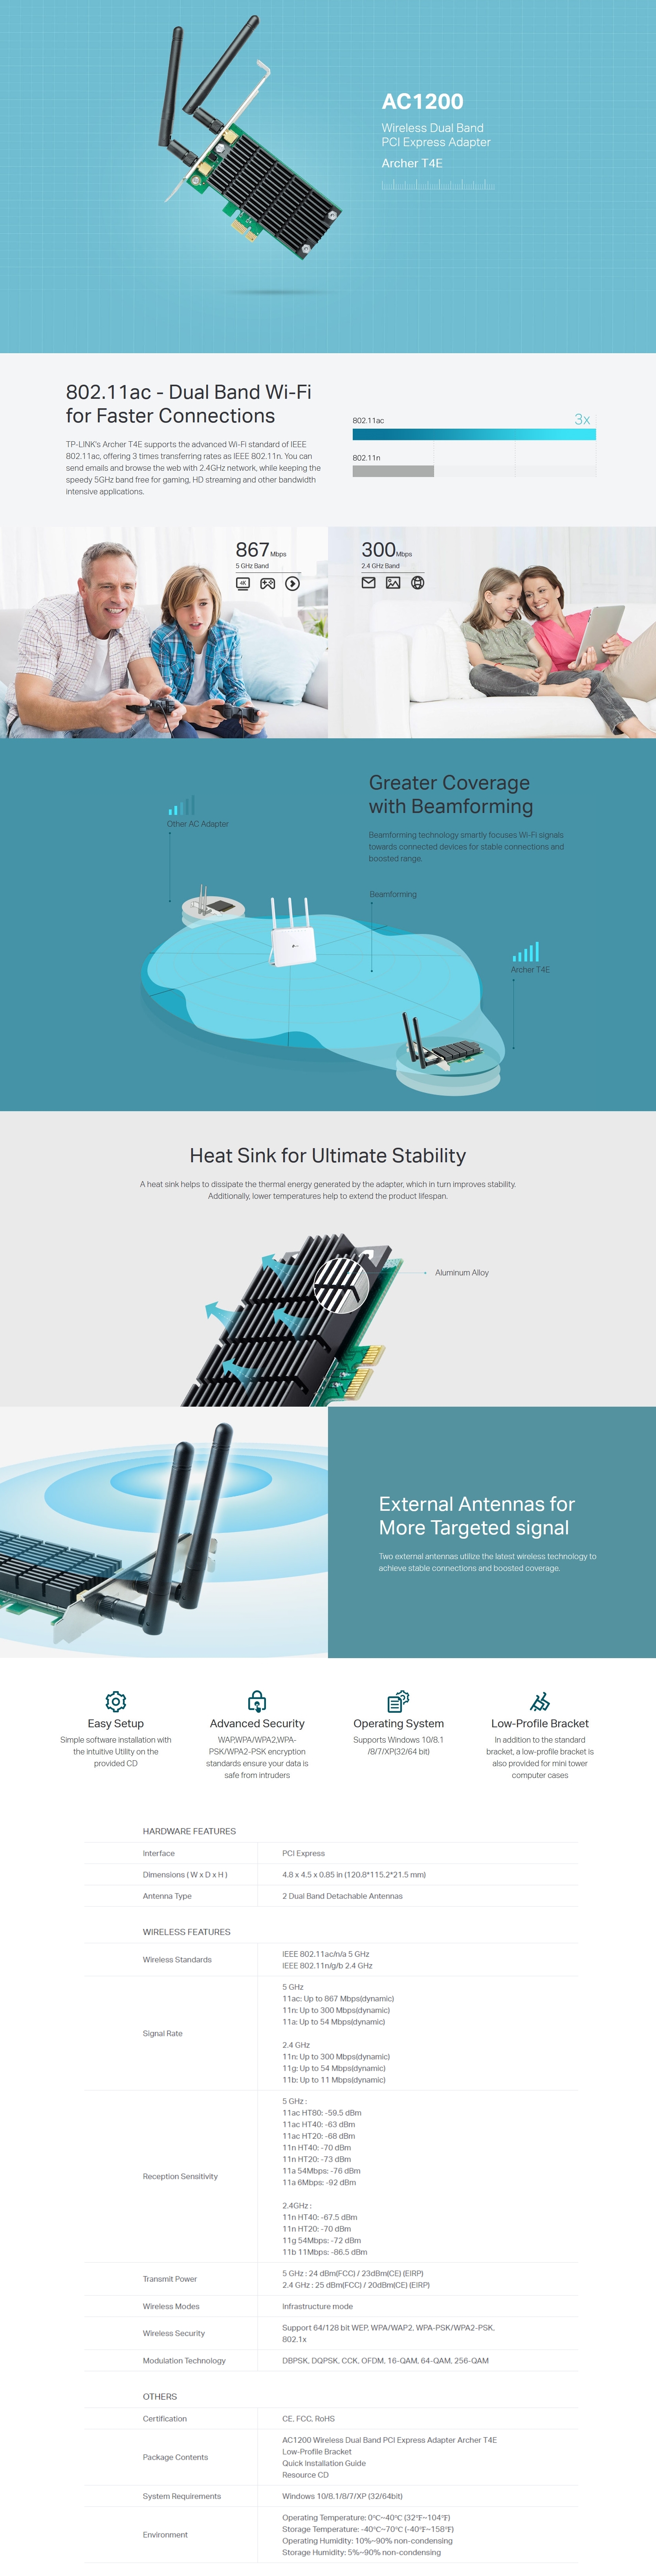 A large marketing image providing additional information about the product TP-Link Archer T4E - AC1200 Dual-Band Wi-Fi 5 PCIe Adapter - Additional alt info not provided